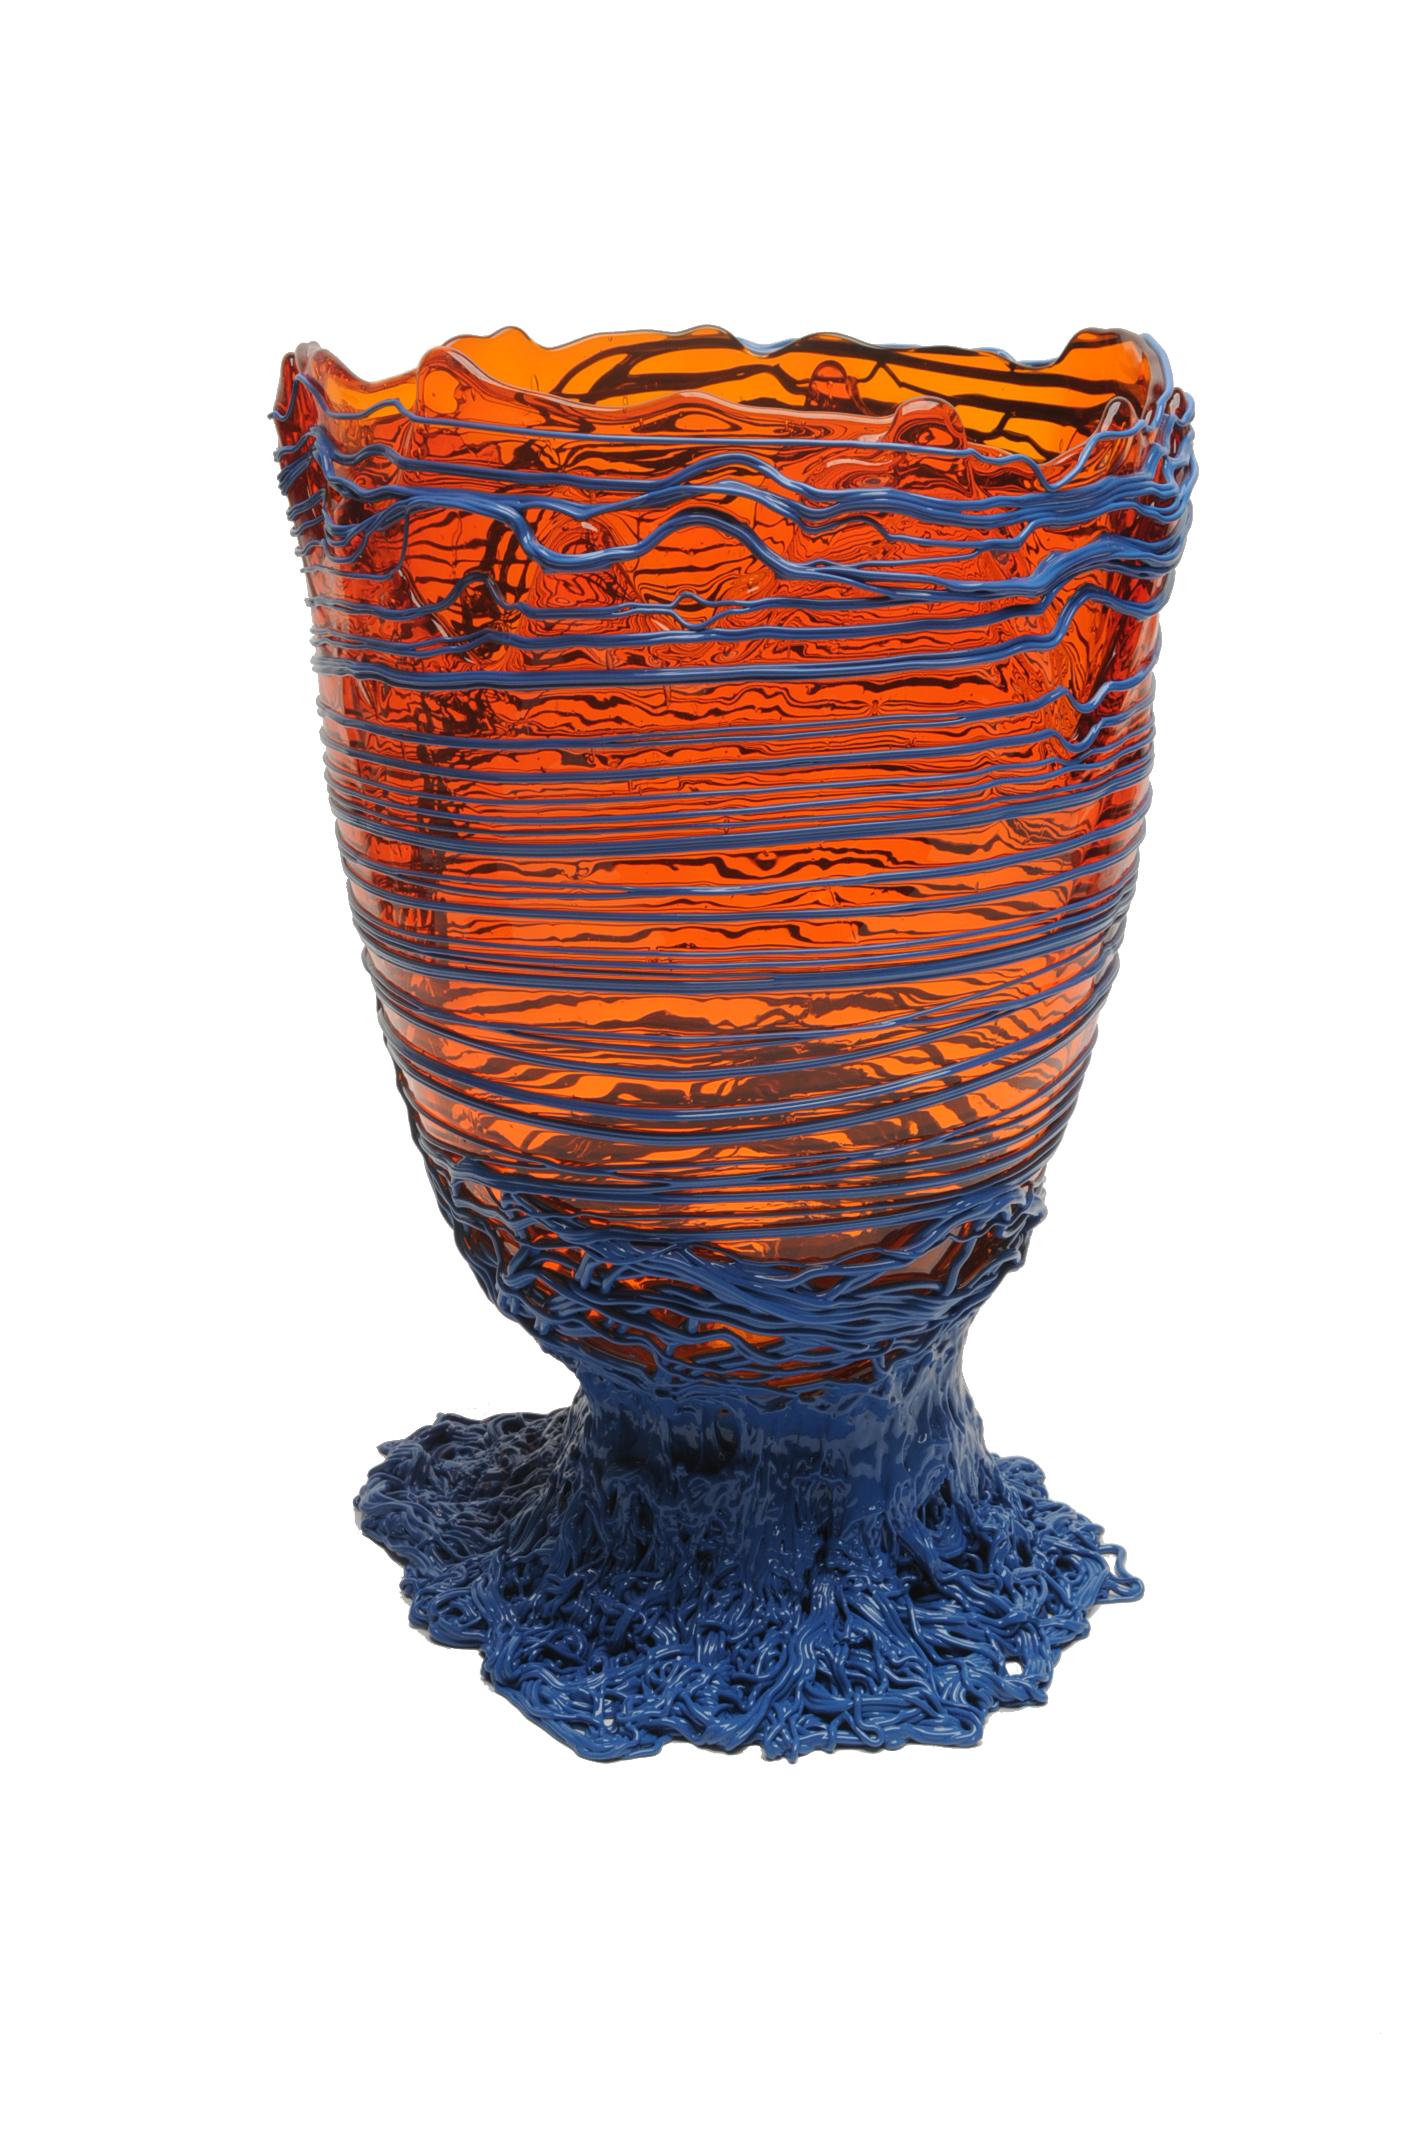 Spaghetti vase, clear orange, matt dark lavender.

Vase in soft resin designed by Gaetano Pesce in 1995 for Fish Design collection.

Measures: M - ø 16cm x H 26cm

Other sizes available.

Colors: clear orange, matt dark lavender..
Vase in